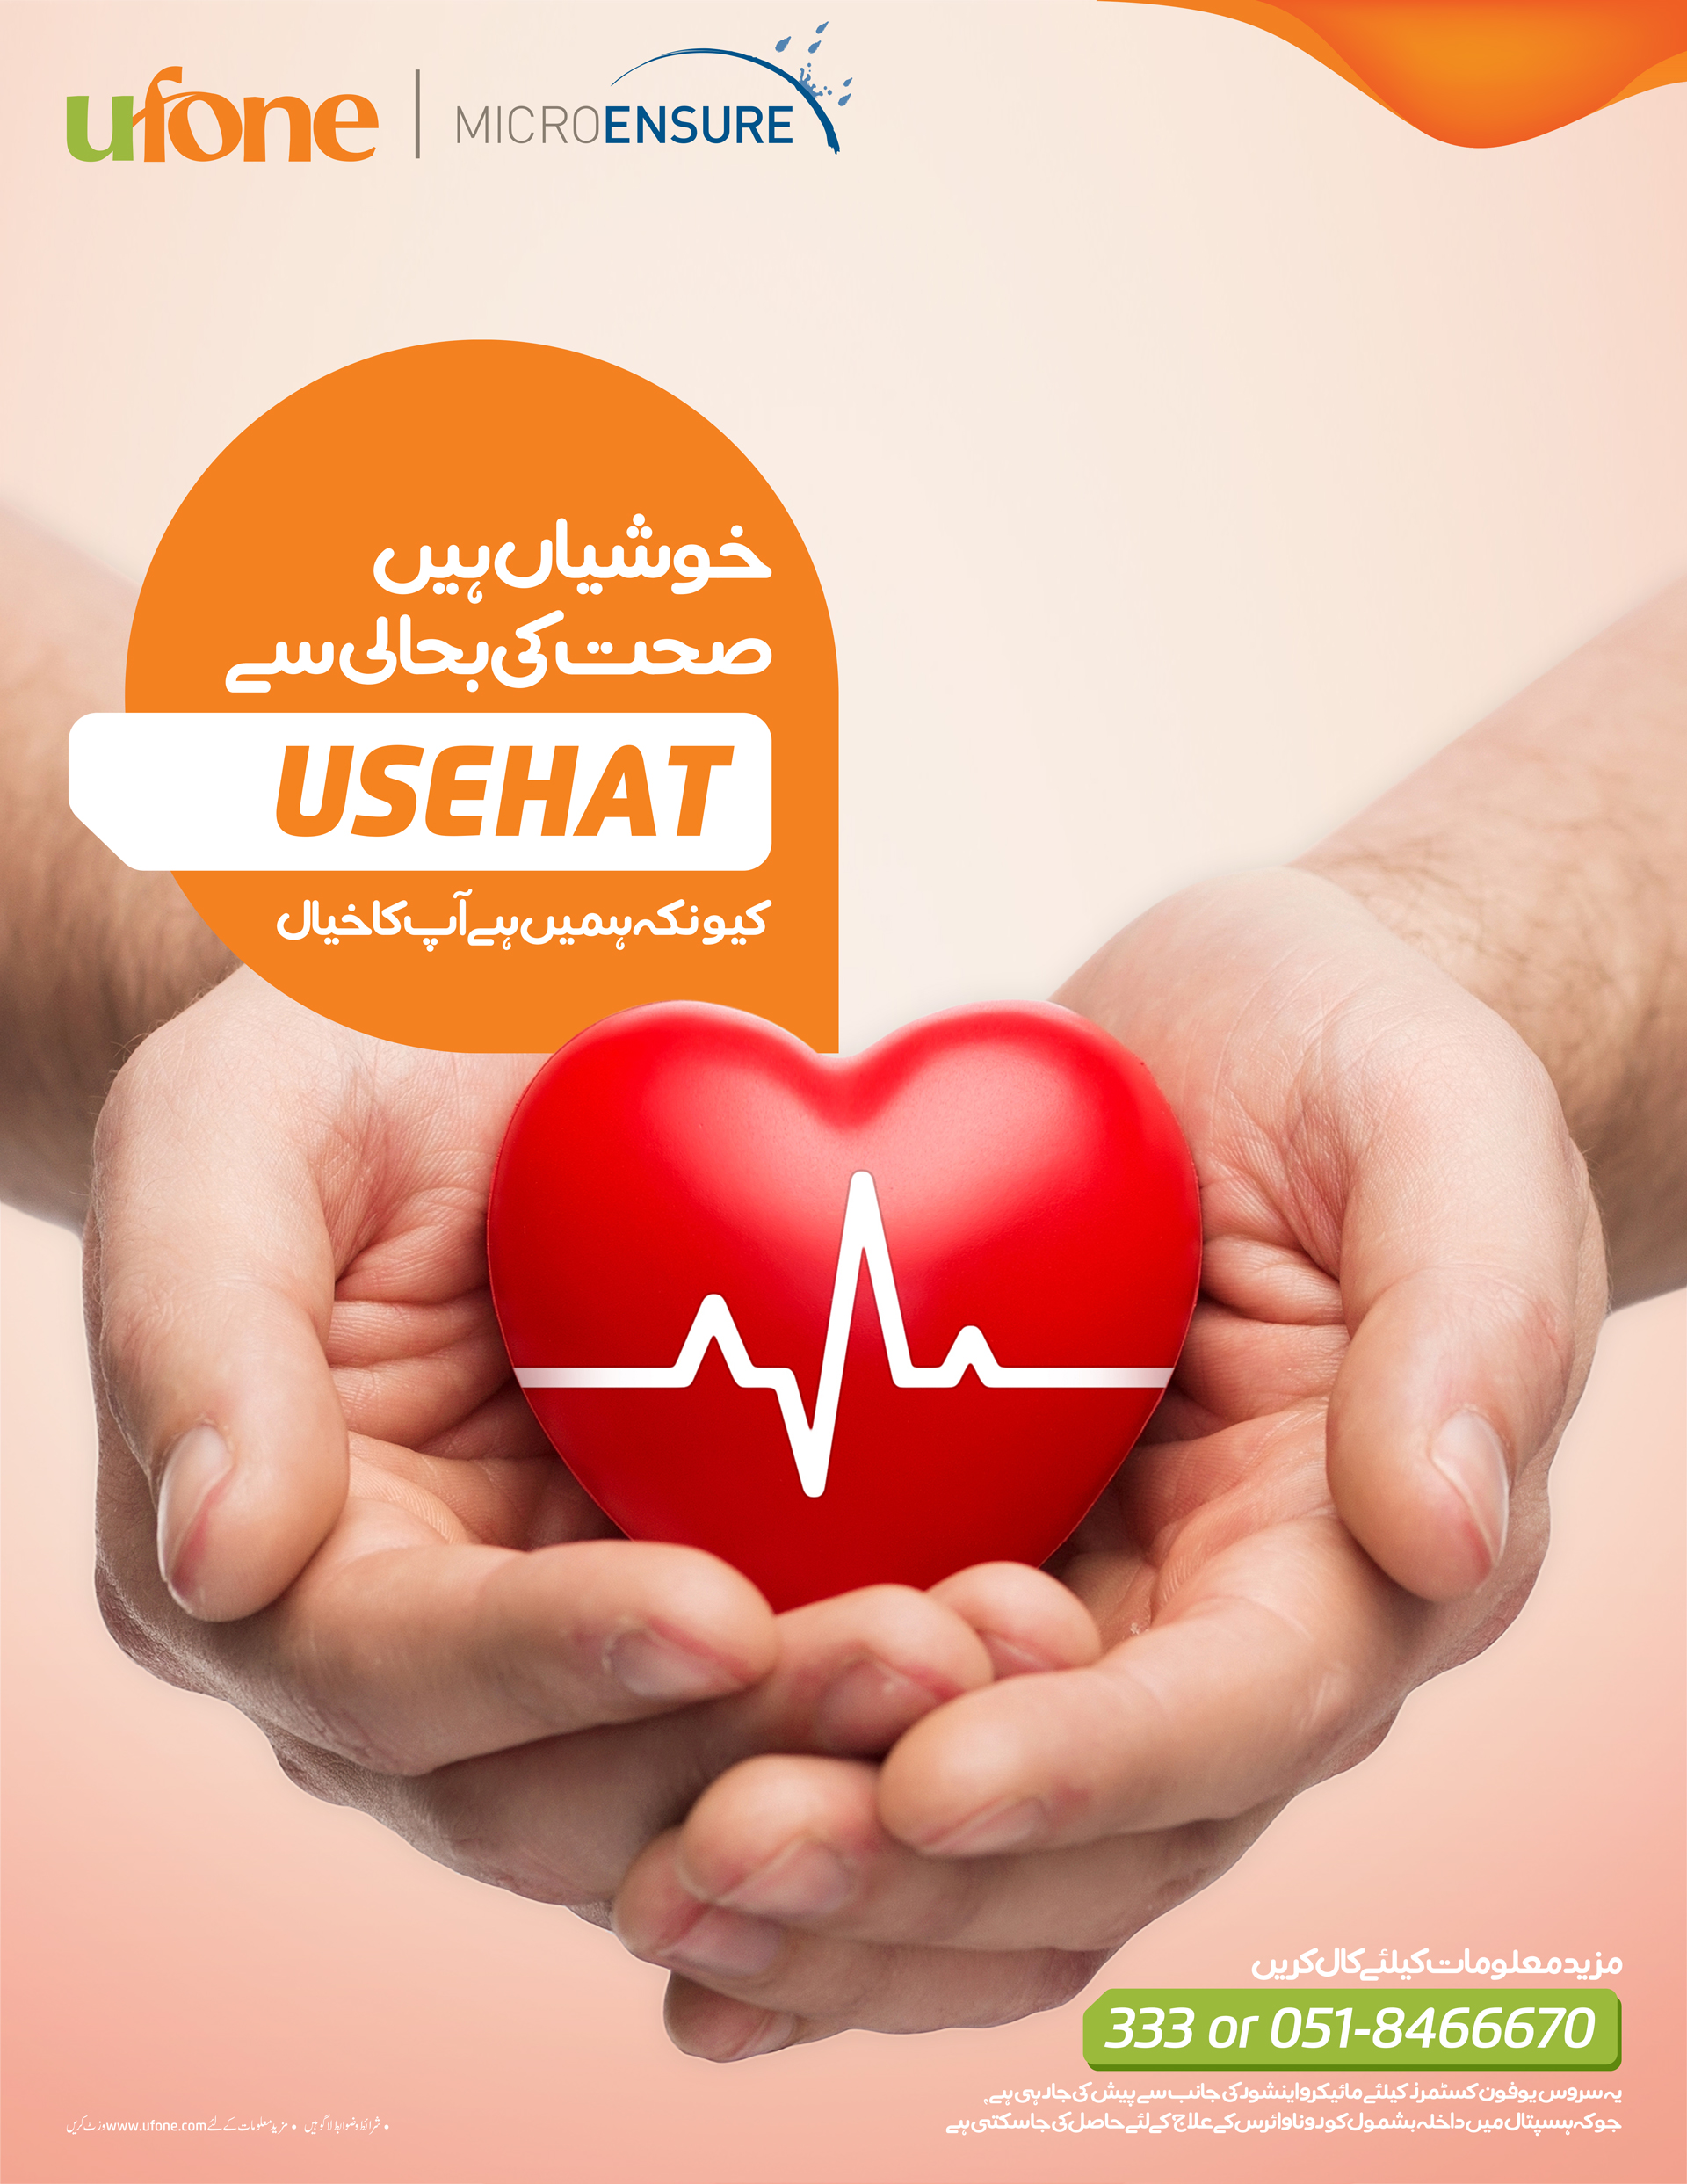 USehat offers affordable healthcare solution to Pakistanis in times of need